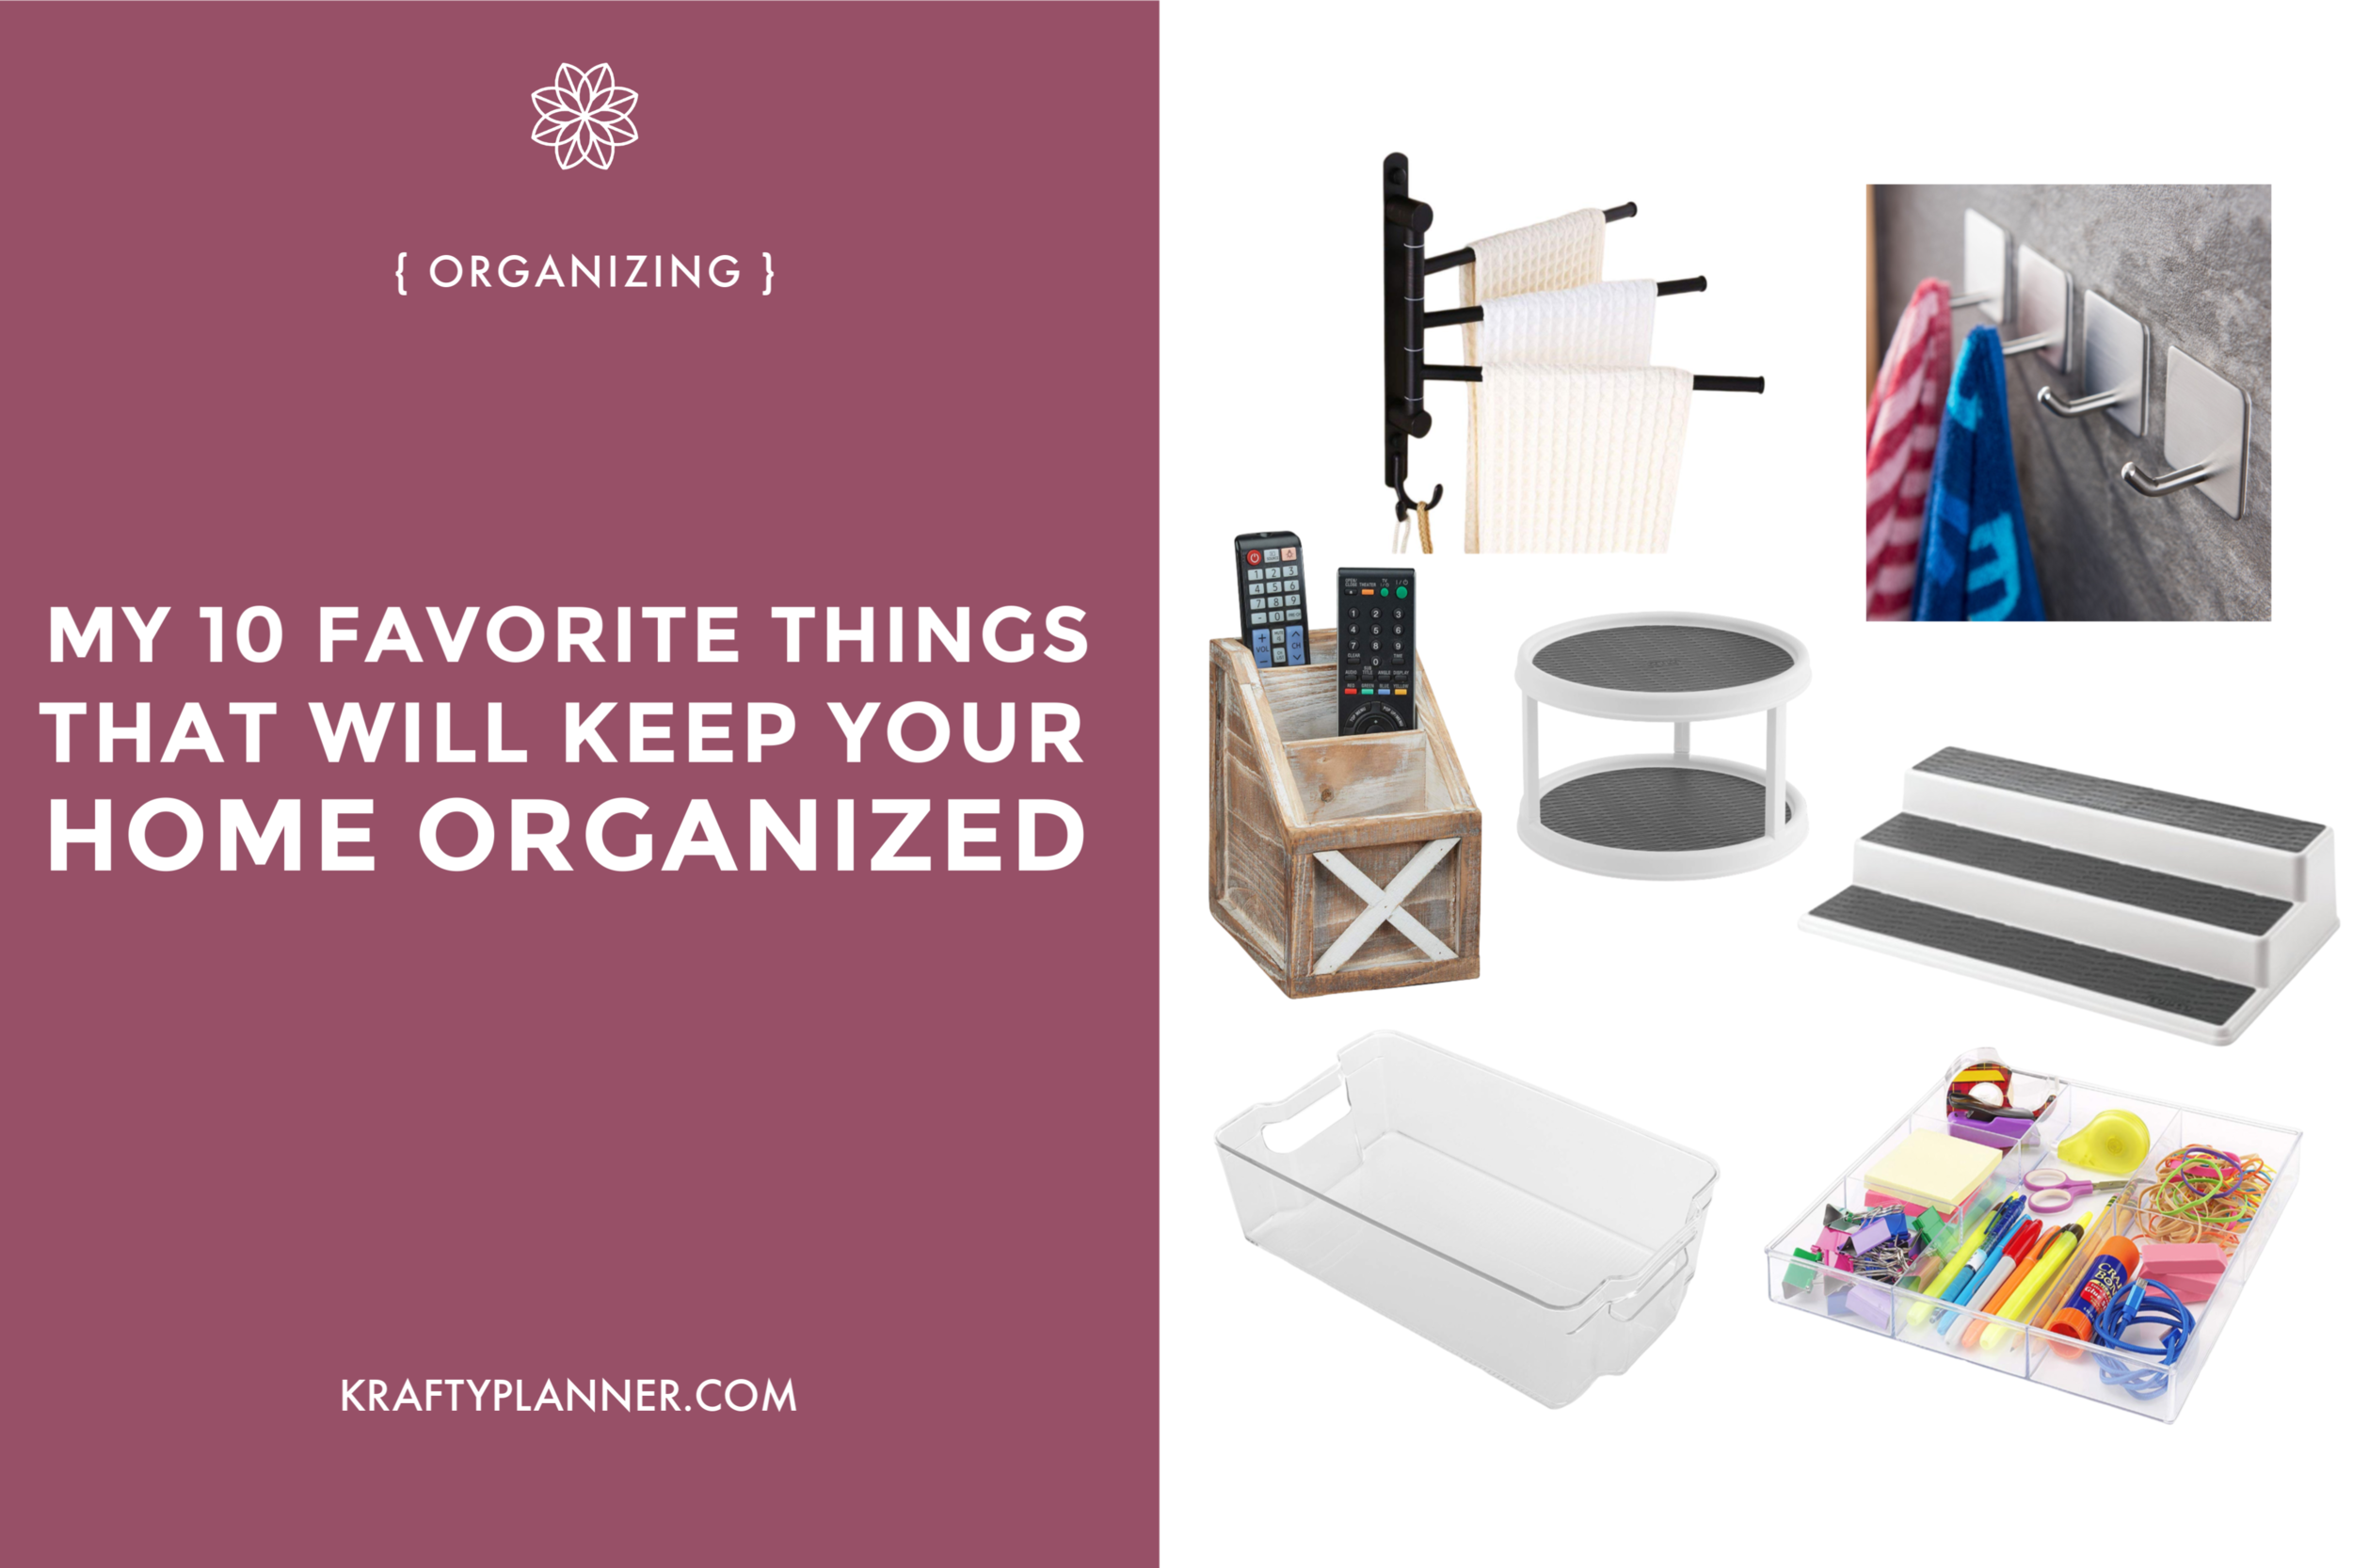 My 10 Favorite Things That Will Keep Your Home Organized